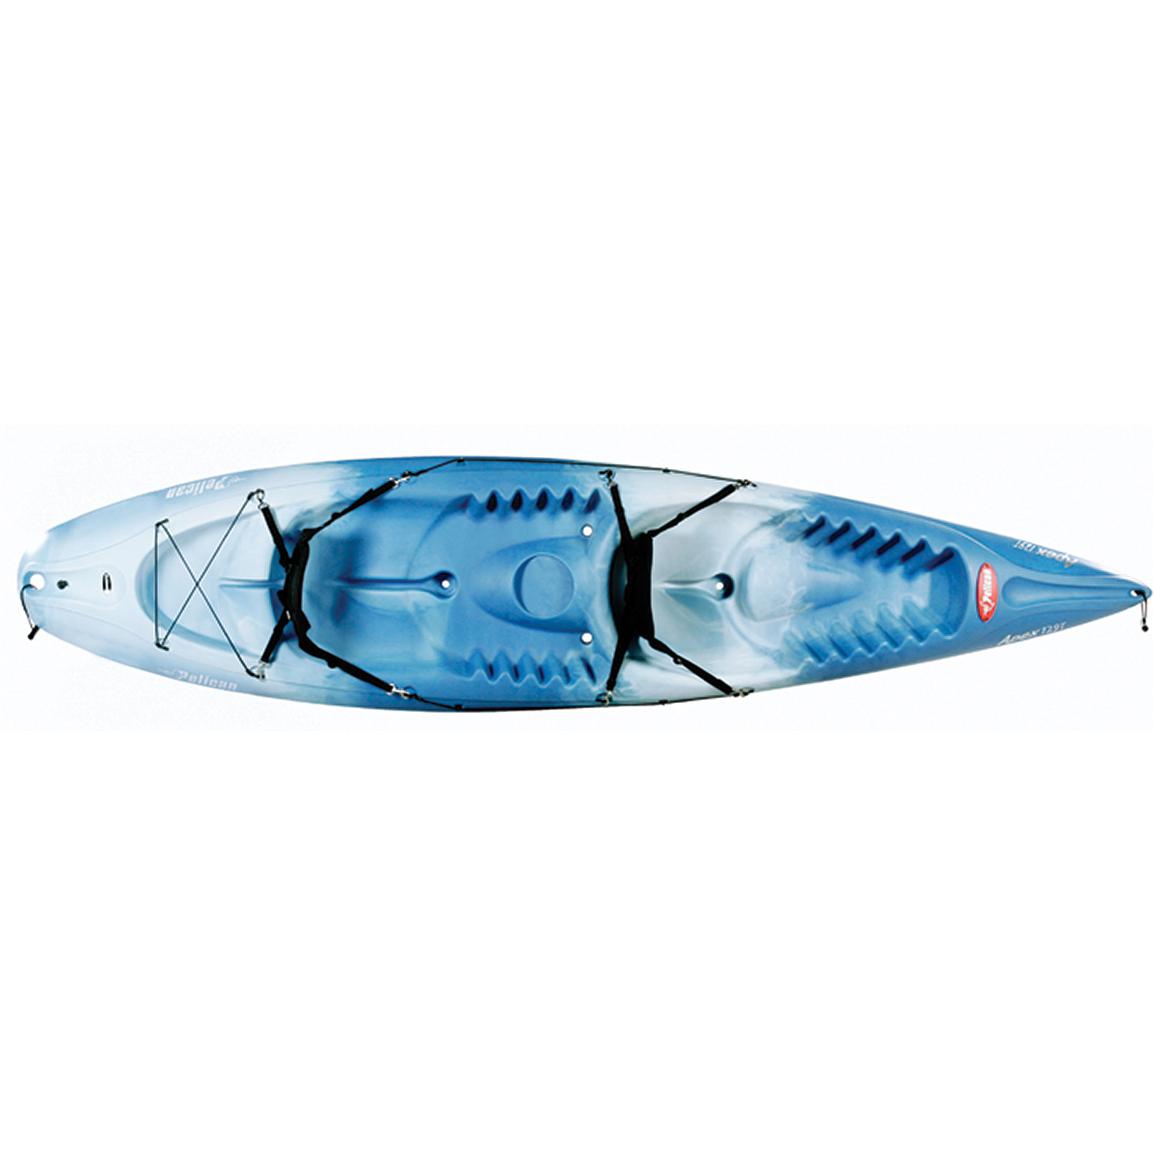 pelican-apex-129t-kayak-in-shaded-blue-and-white-124670-canoes